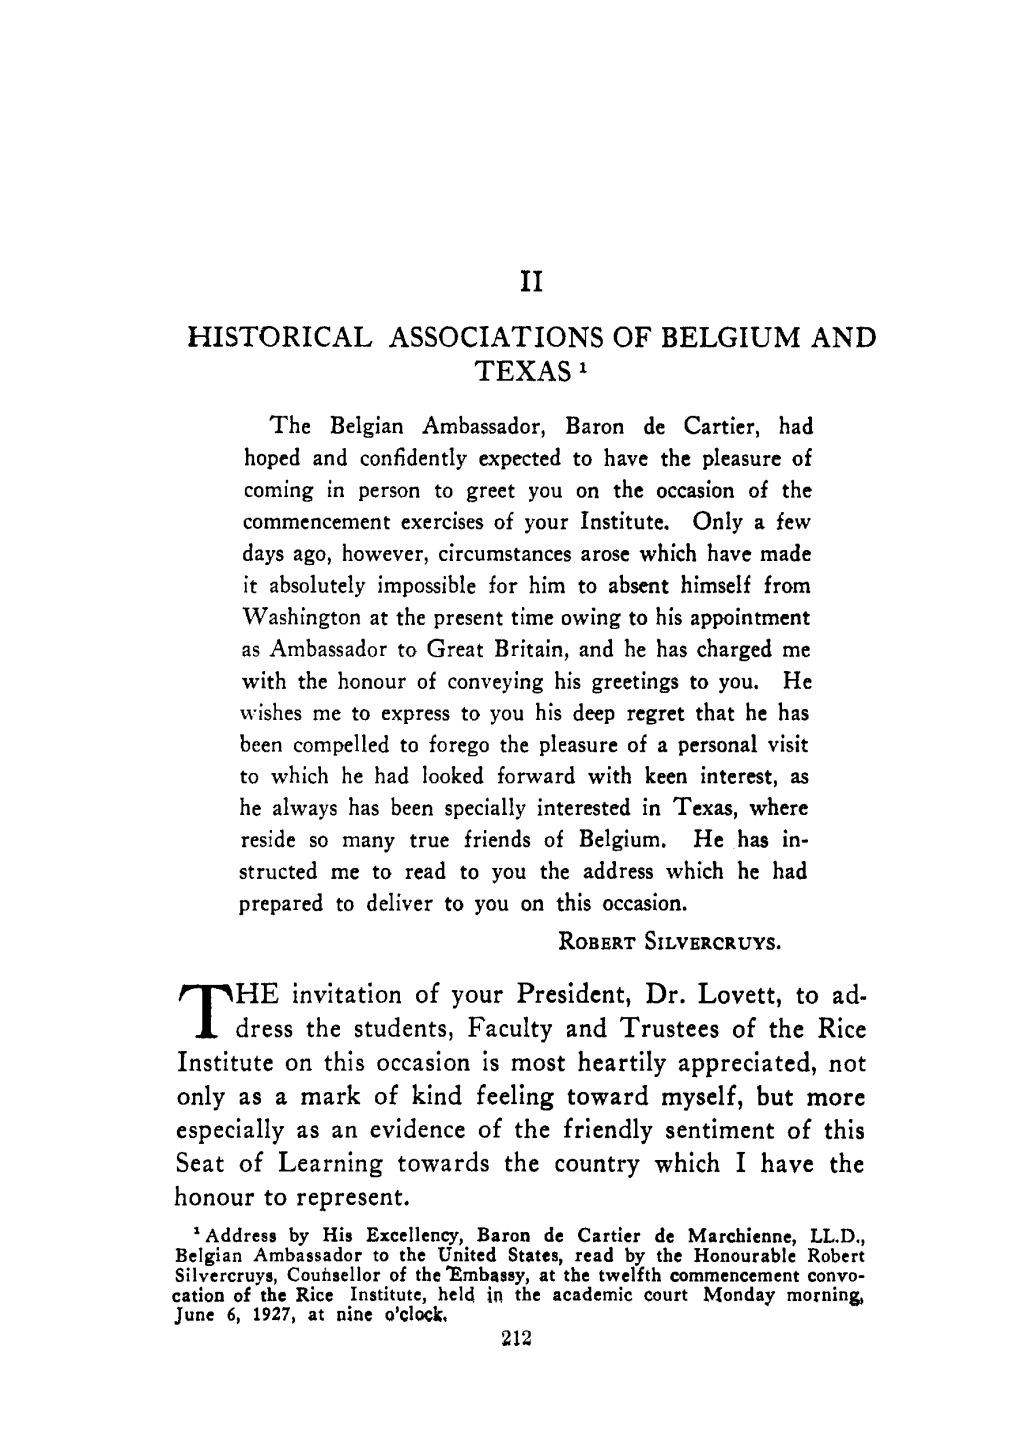 Historical Associations of Belgium and Texas